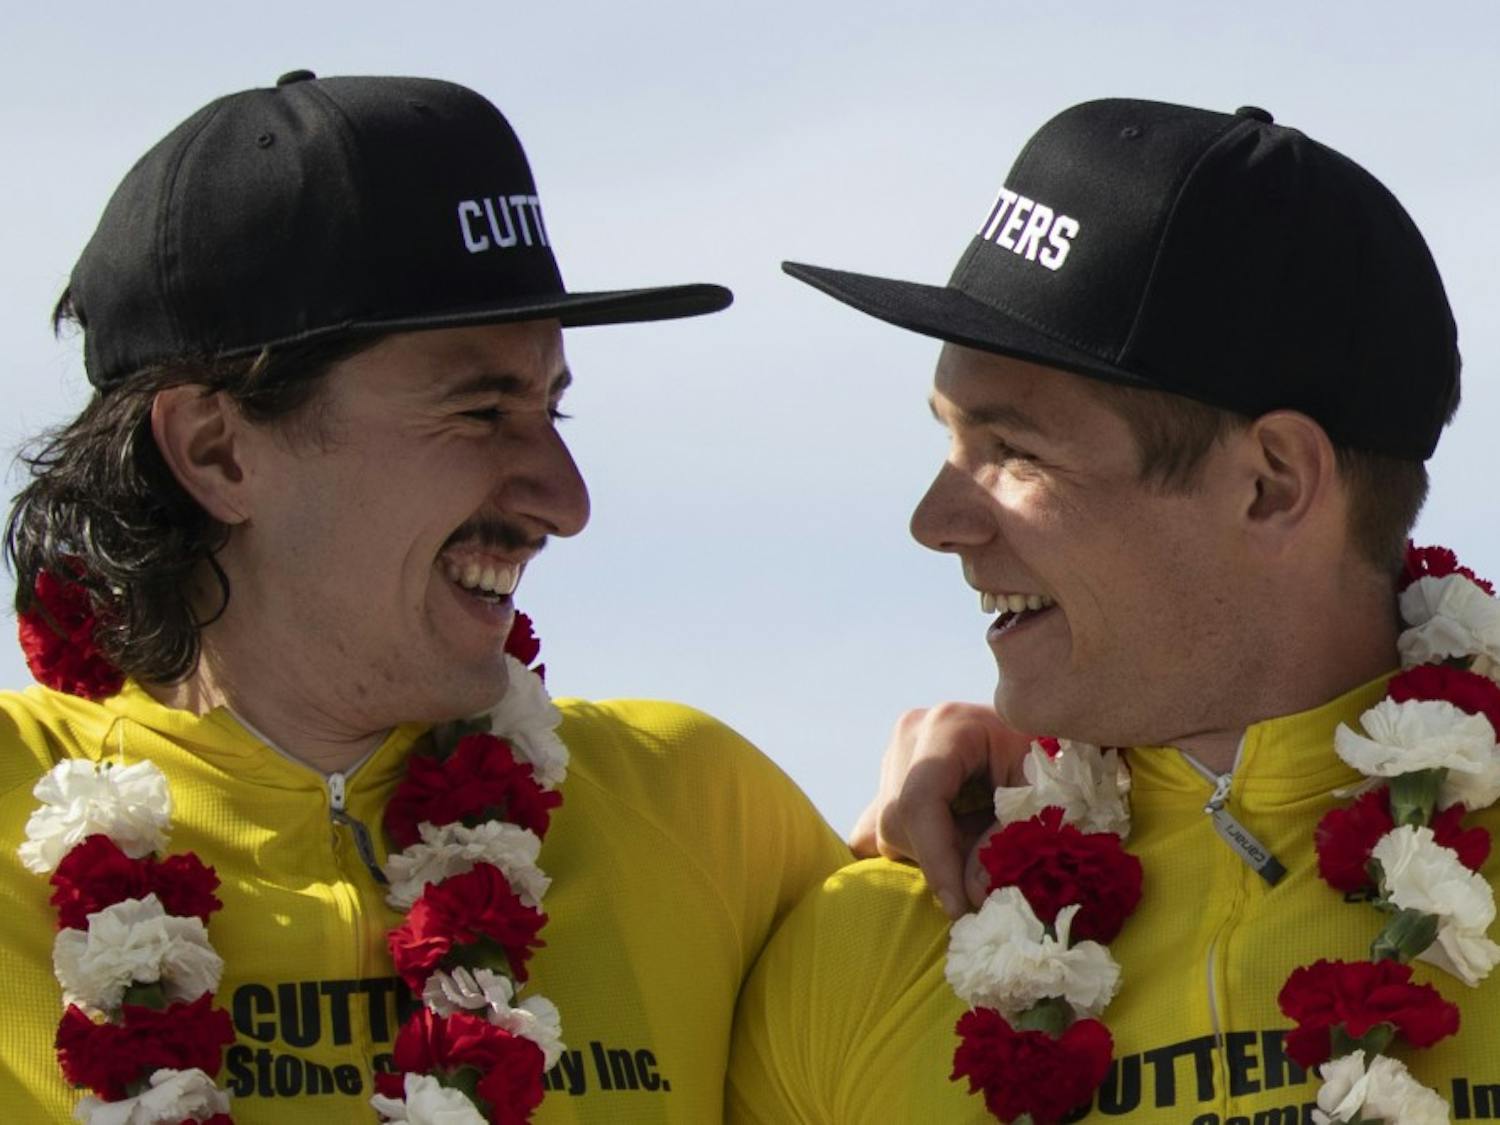 GALLERY: Cutters finishes first in the 2019 Men's Little 500